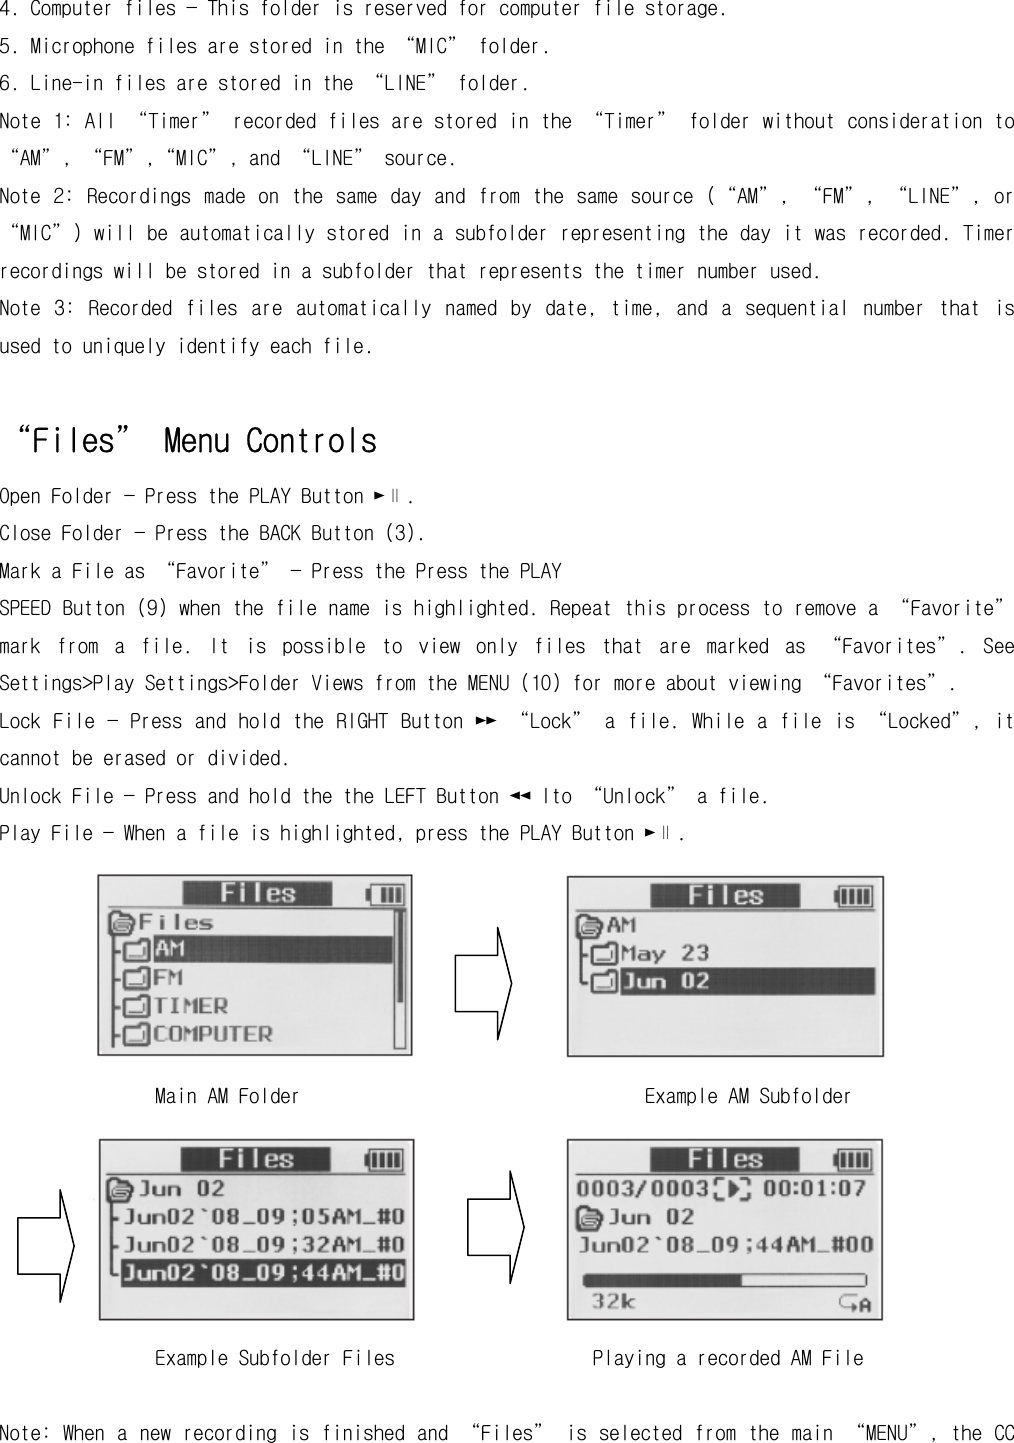 4. Computer files — This folder is reserved for computer file storage. 5. Microphone files are stored in the “MIC” folder. 6. Line-in files are stored in the “LINE” folder. Note 1: All “Timer” recorded files are stored in the “Timer” folder without consideration to “AM”, “FM”,“MIC”, and “LINE” source. Note 2:  Recordings made  on the same  day and  from the same  source (“AM”, “FM”, “LINE”,  or “MIC”) will be automatically stored in a subfolder representing the day it was recorded. Timer recordings will be stored in a subfolder that represents the timer number used. Note  3:  Recorded  files  are  automatically  named  by  date,  time,  and  a  sequential  number  that  is used to uniquely identify each file.  “Files” Menu Controls Open Folder — Press the PLAY Button ►∥. Close Folder — Press the BACK Button (3). Mark a File as “Favorite” — Press the Press the PLAY SPEED Button (9) when the file name is highlighted. Repeat this process to remove a “Favorite” mark  from  a  file.  It  is  possible  to  view  only  files  that  are  marked  as  “Favorites”.  See Settings&gt;Play Settings&gt;Folder Views from the MENU (10) for more about viewing “Favorites”. Lock File — Press and hold the RIGHT Button ►► “Lock”  a file. While a file is “Locked”, it cannot be erased or divided. Unlock File — Press and hold the the LEFT Button ◄◄ Ito “Unlock” a file. Play File — When a file is highlighted, press the PLAY Button ►∥.       Main AM Folder                                 Example AM Subfolder       Example Subfolder Files                   Playing a recorded AM File  Note: When a new recording is finished and “Files” is selected from the main “MENU”, the CC 